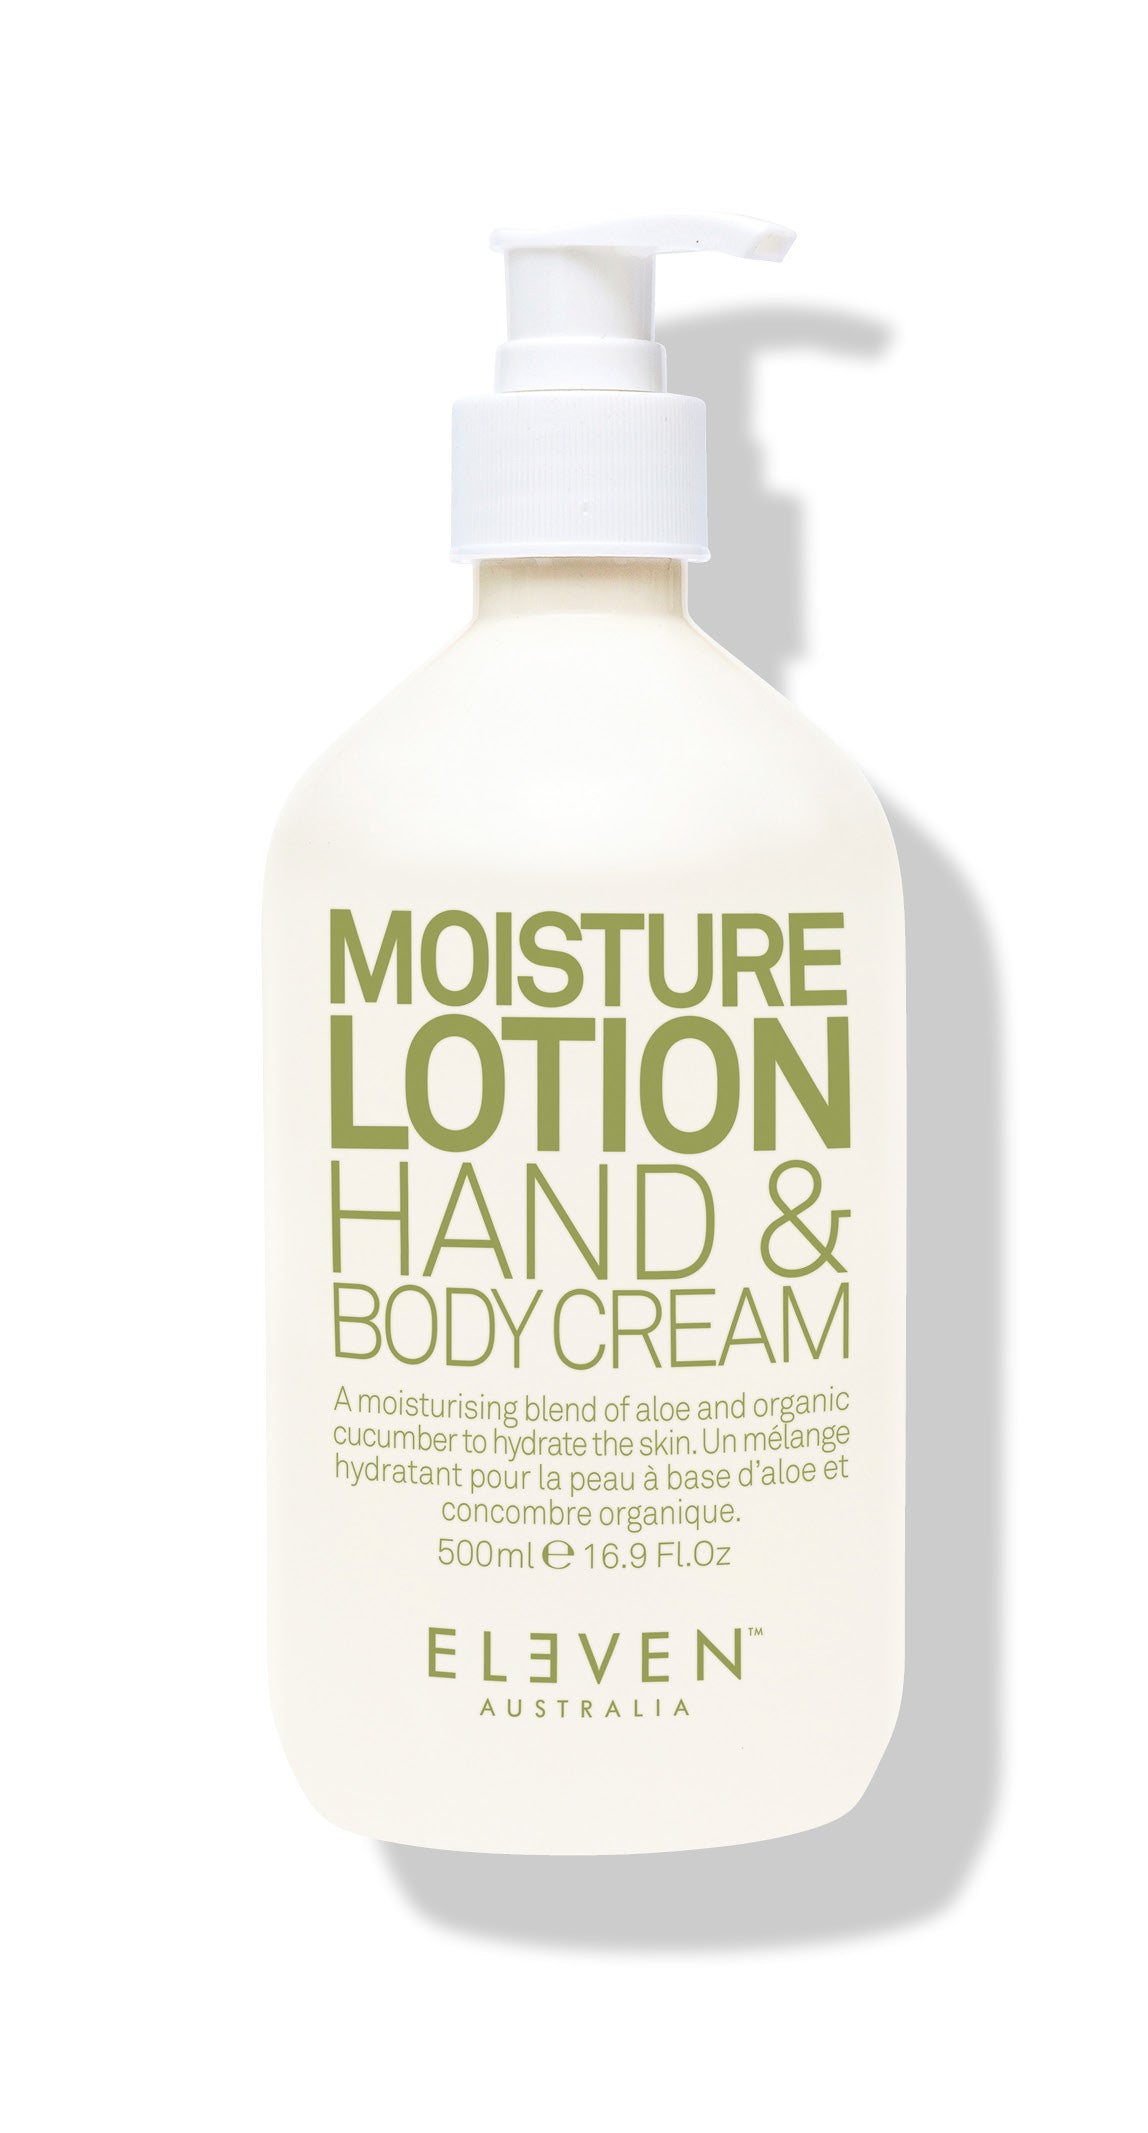 ELEVEN Hair Moisture Lotion Hand & Body Cream is the perfect everyday moisturiser. Coconut Oil and Vitamin E fight free-radicals 